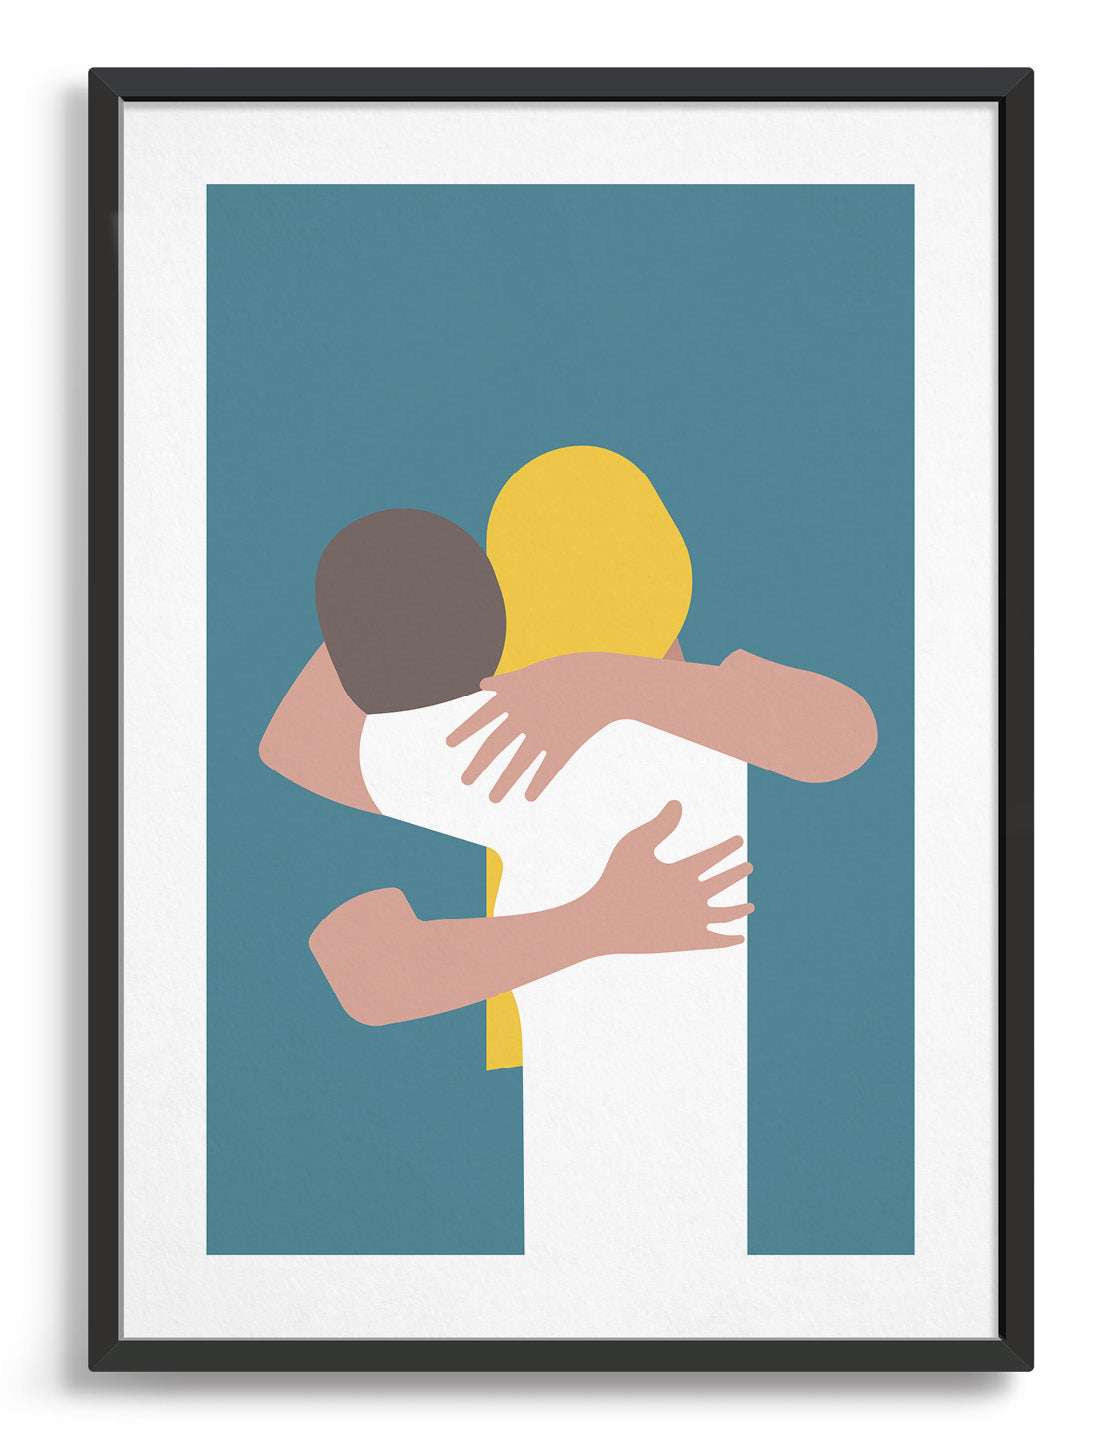 A minimal design art print of a couple embracing against a blue background. The girl has long blond hair and is wearing a white top, the man leans into her neck and wear as teal blue t-shirt